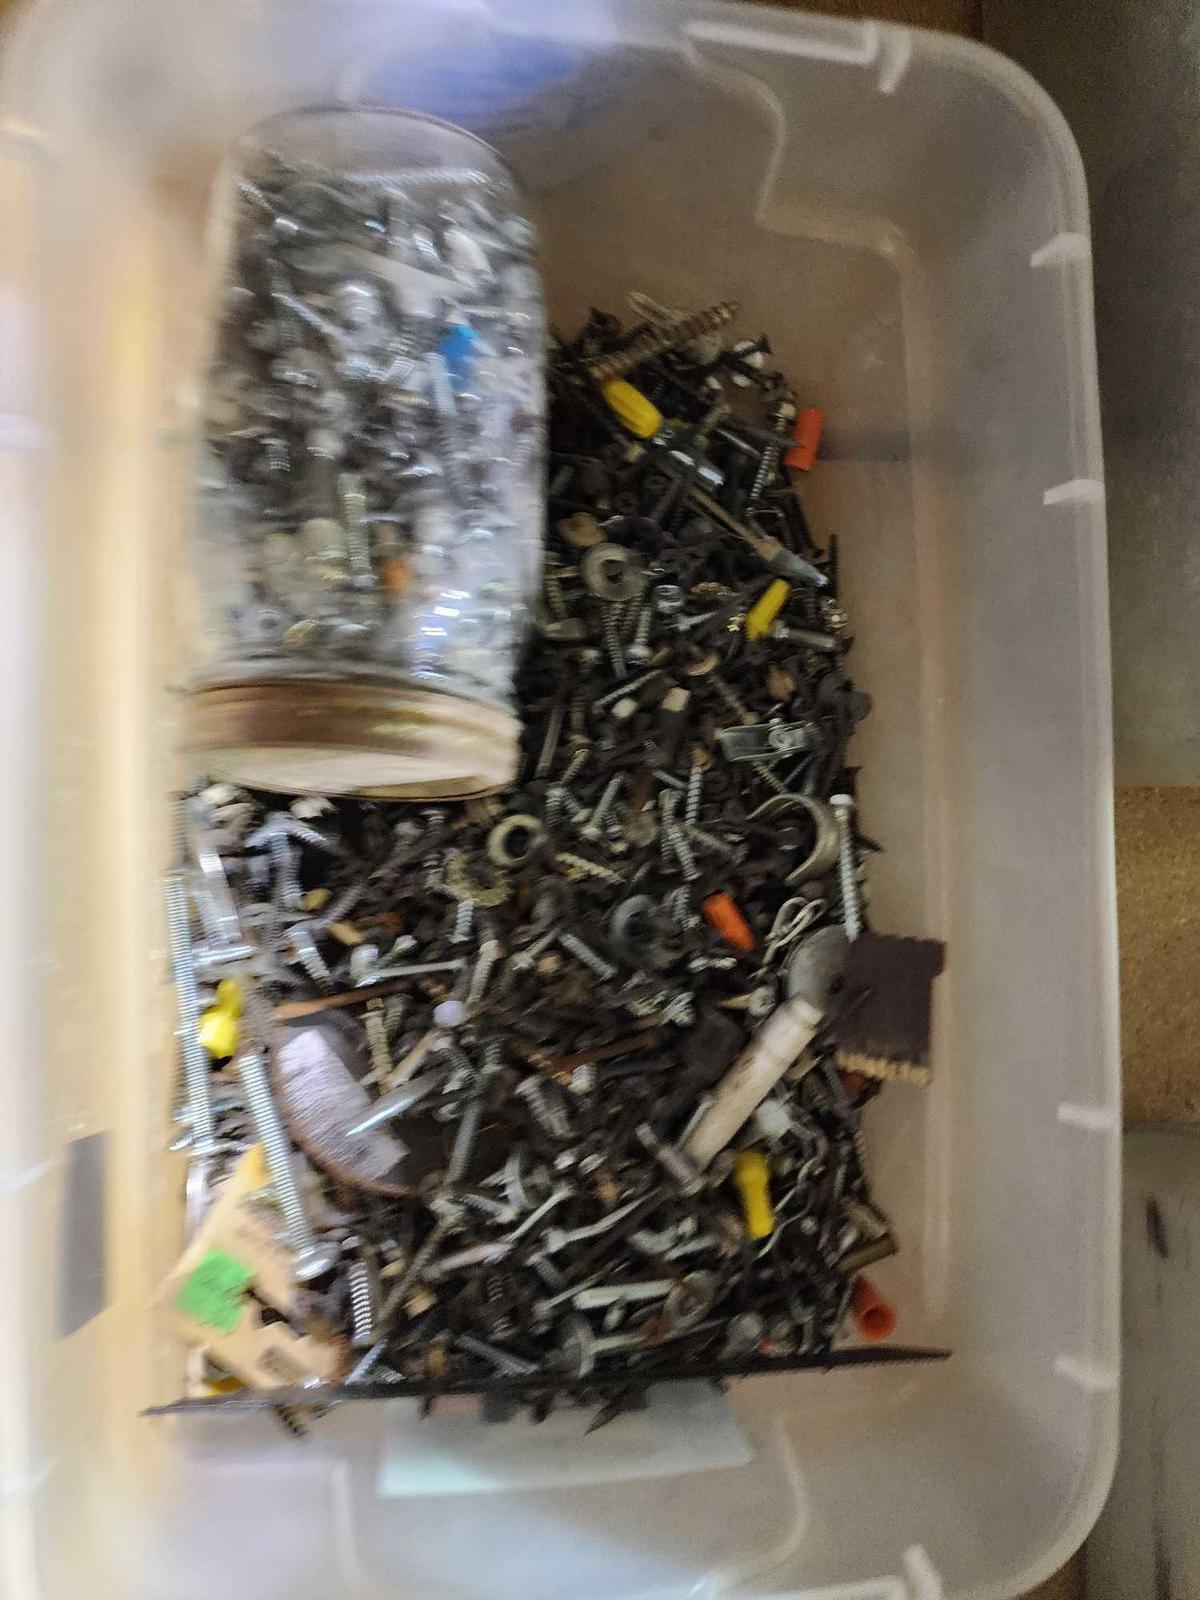 Large amount of miscellaneous screws.